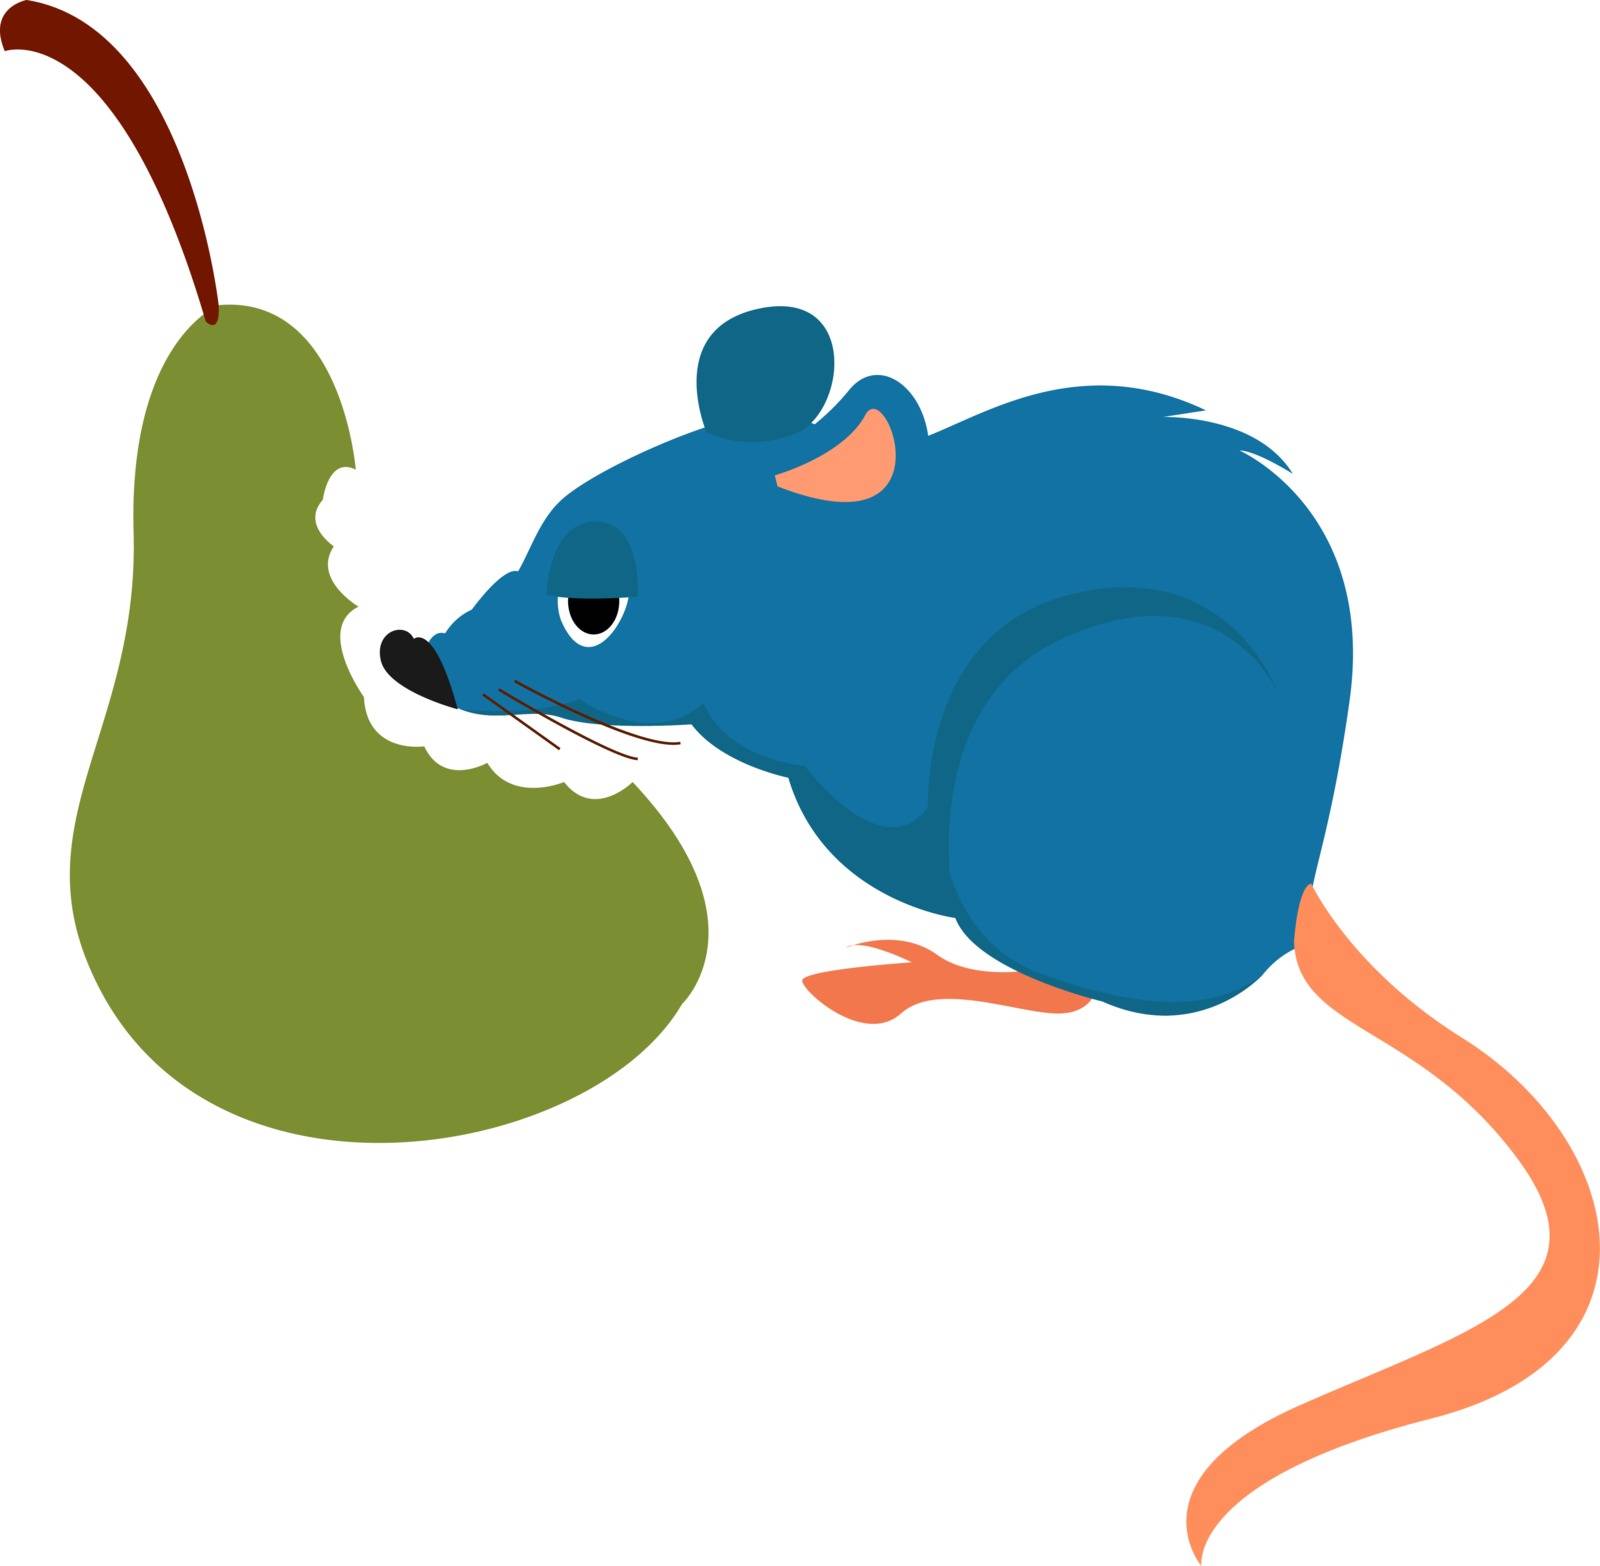 Rat and pear, illustration, vector on white background. by Morphart